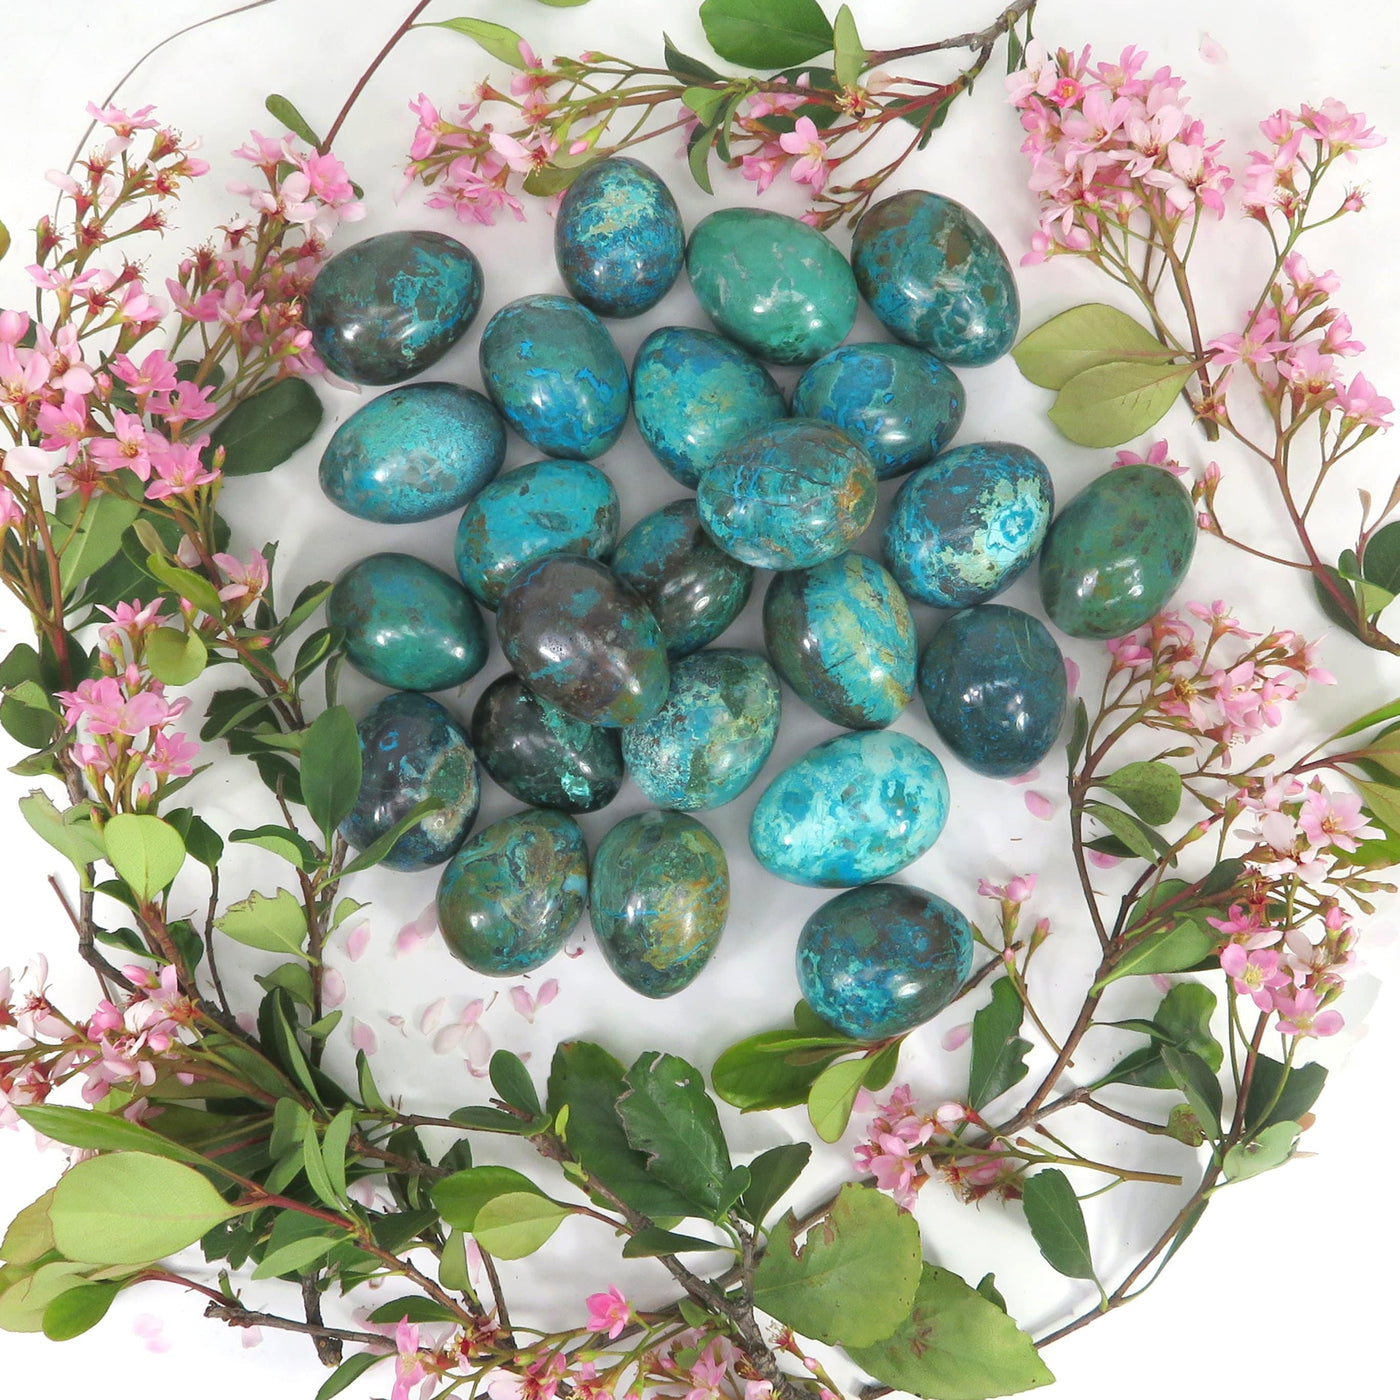 Chrysocolla Polished Stone Eggs to show the differences in size, shape and color. 